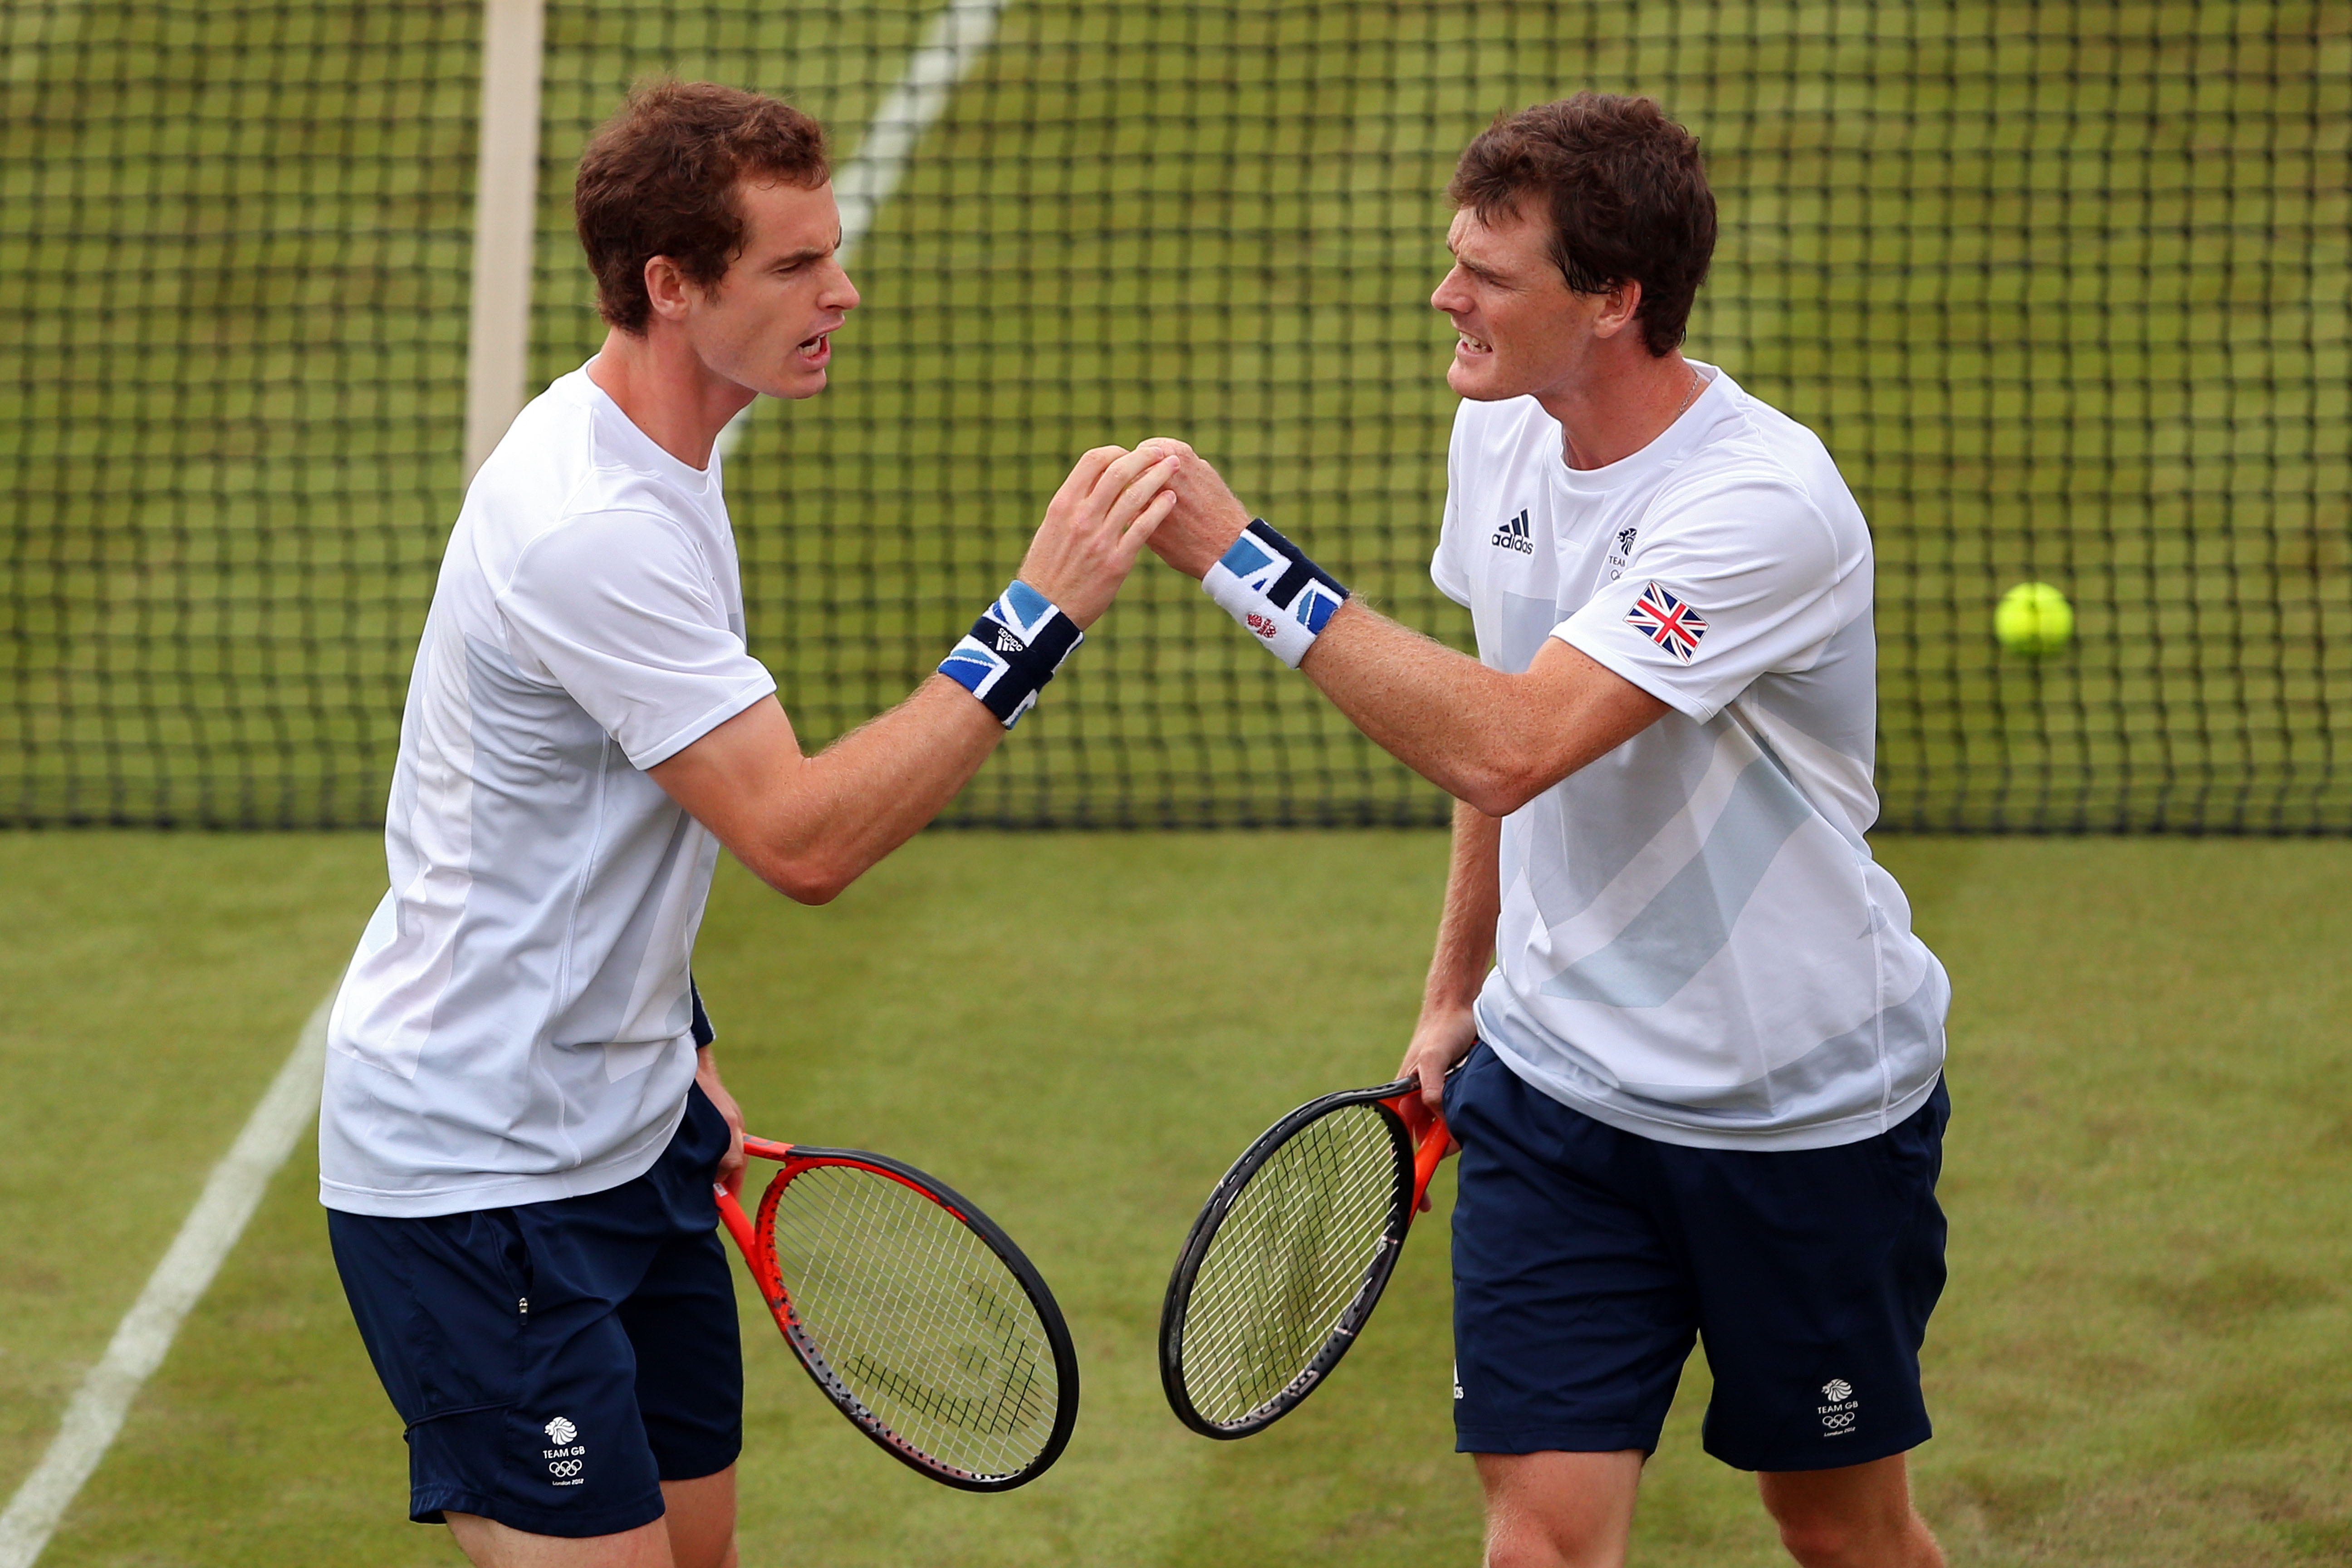 LONDON, ENGLAND - JULY 28: Andy Murray and Jamie Murray of Great Britain reacts after a point against Alexander Peya and Jurgen Melzer of Austria during their Men's Doubles Tennis match on Day 1 of the London 2012 Olympic Games at the All England Lawn Tennis and Croquet Club in Wimbledon on July 28, 2012 in London, England. (Photo by Clive Brunskill/Getty Images)